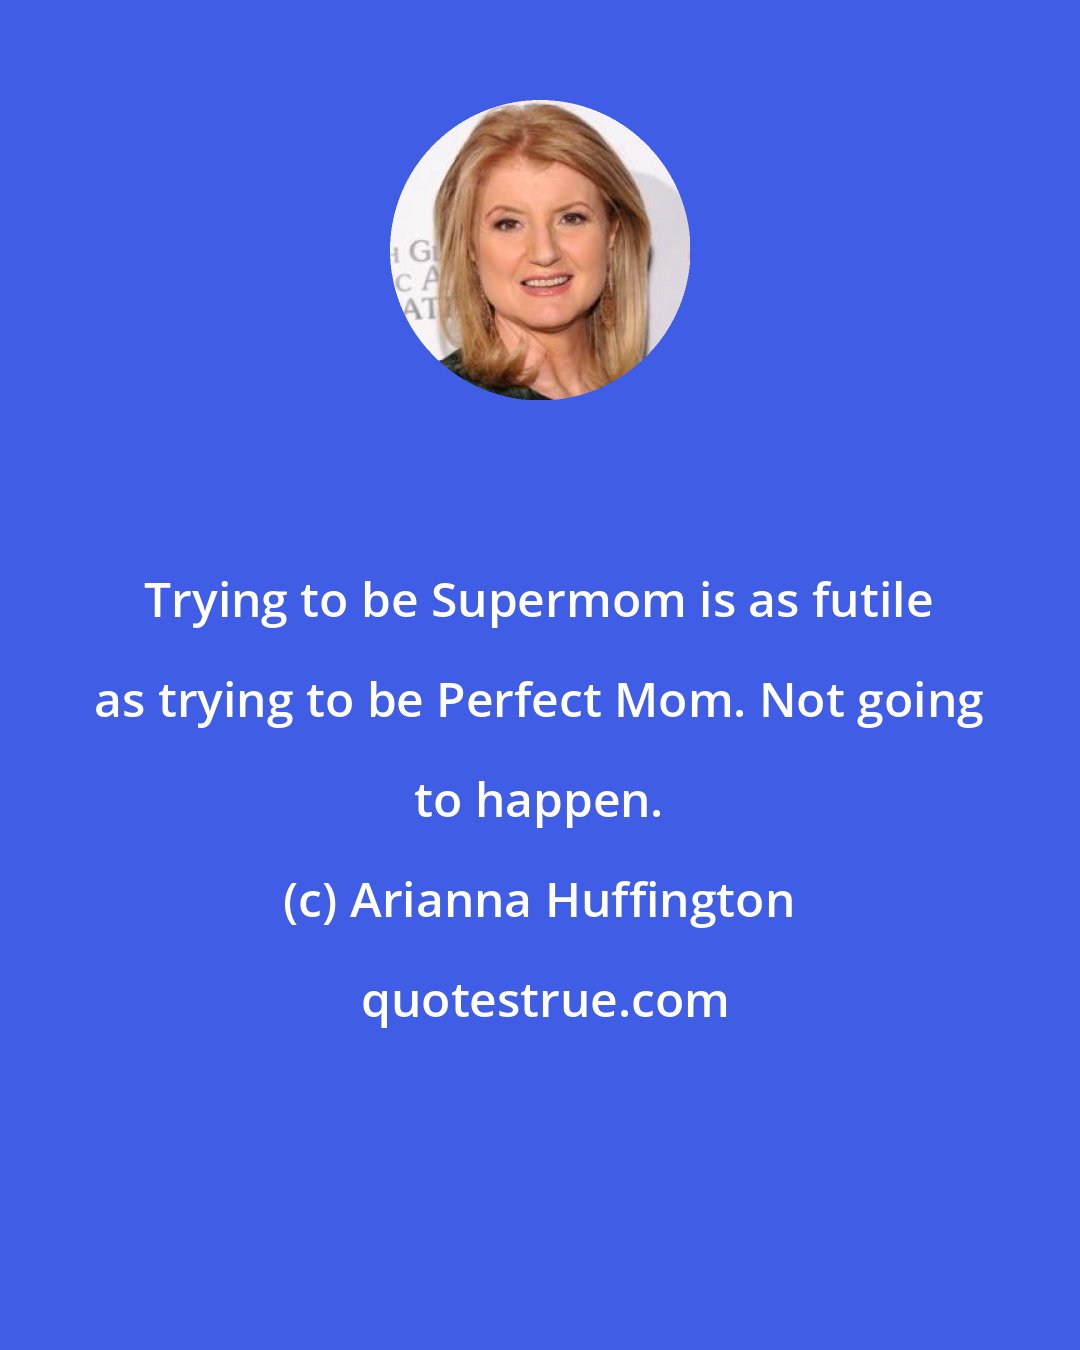 Arianna Huffington: Trying to be Supermom is as futile as trying to be Perfect Mom. Not going to happen.